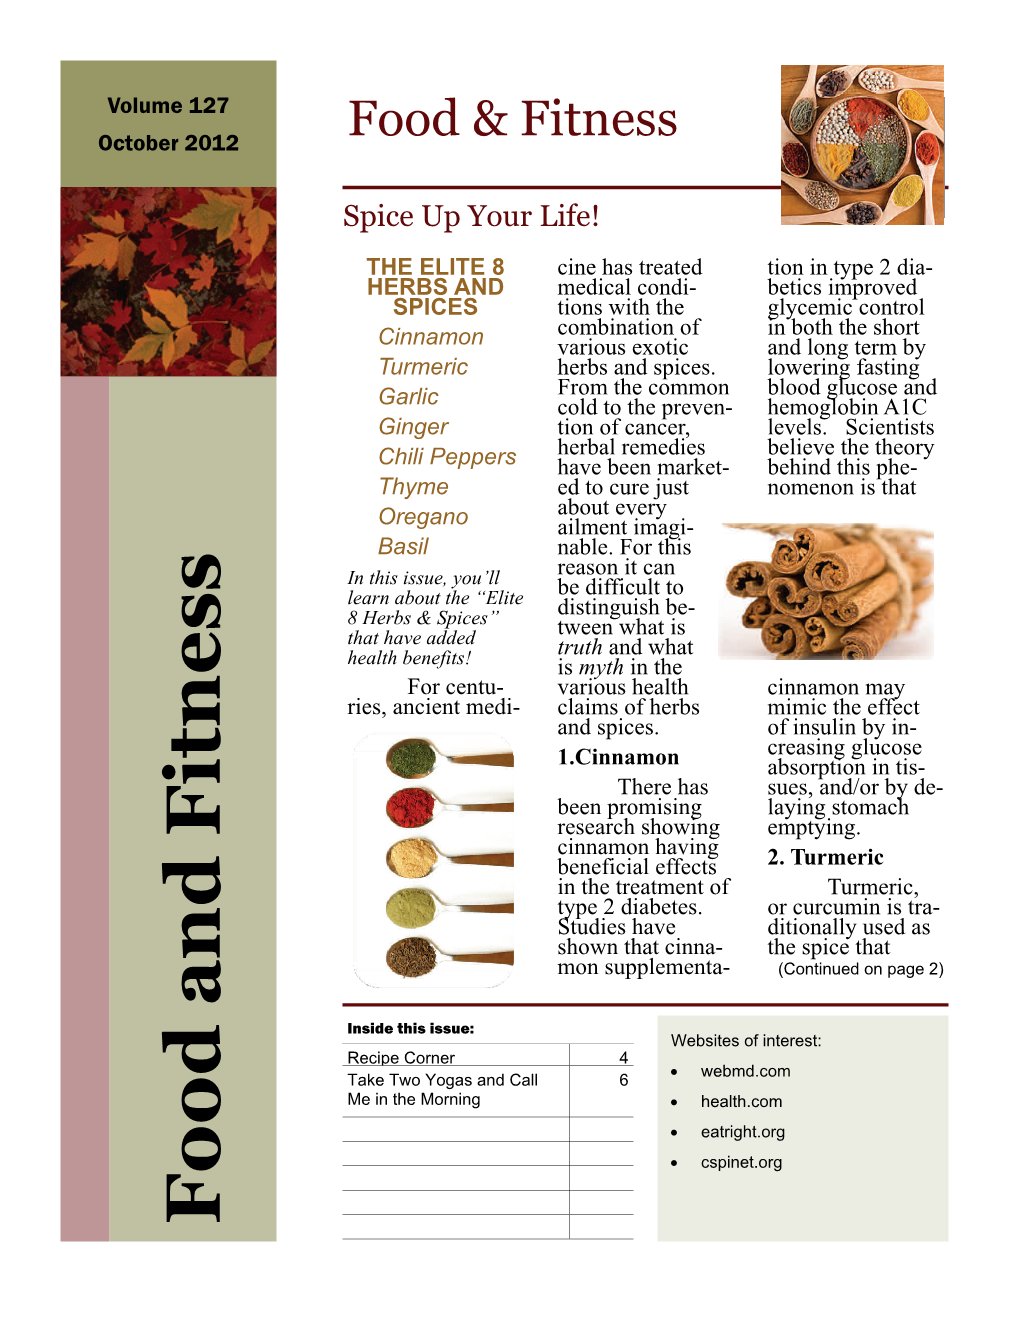 Food and Fitness Spice up Your Life! (Continued from Page 1) Proving Hyperlipidemia, and Chemotherapy